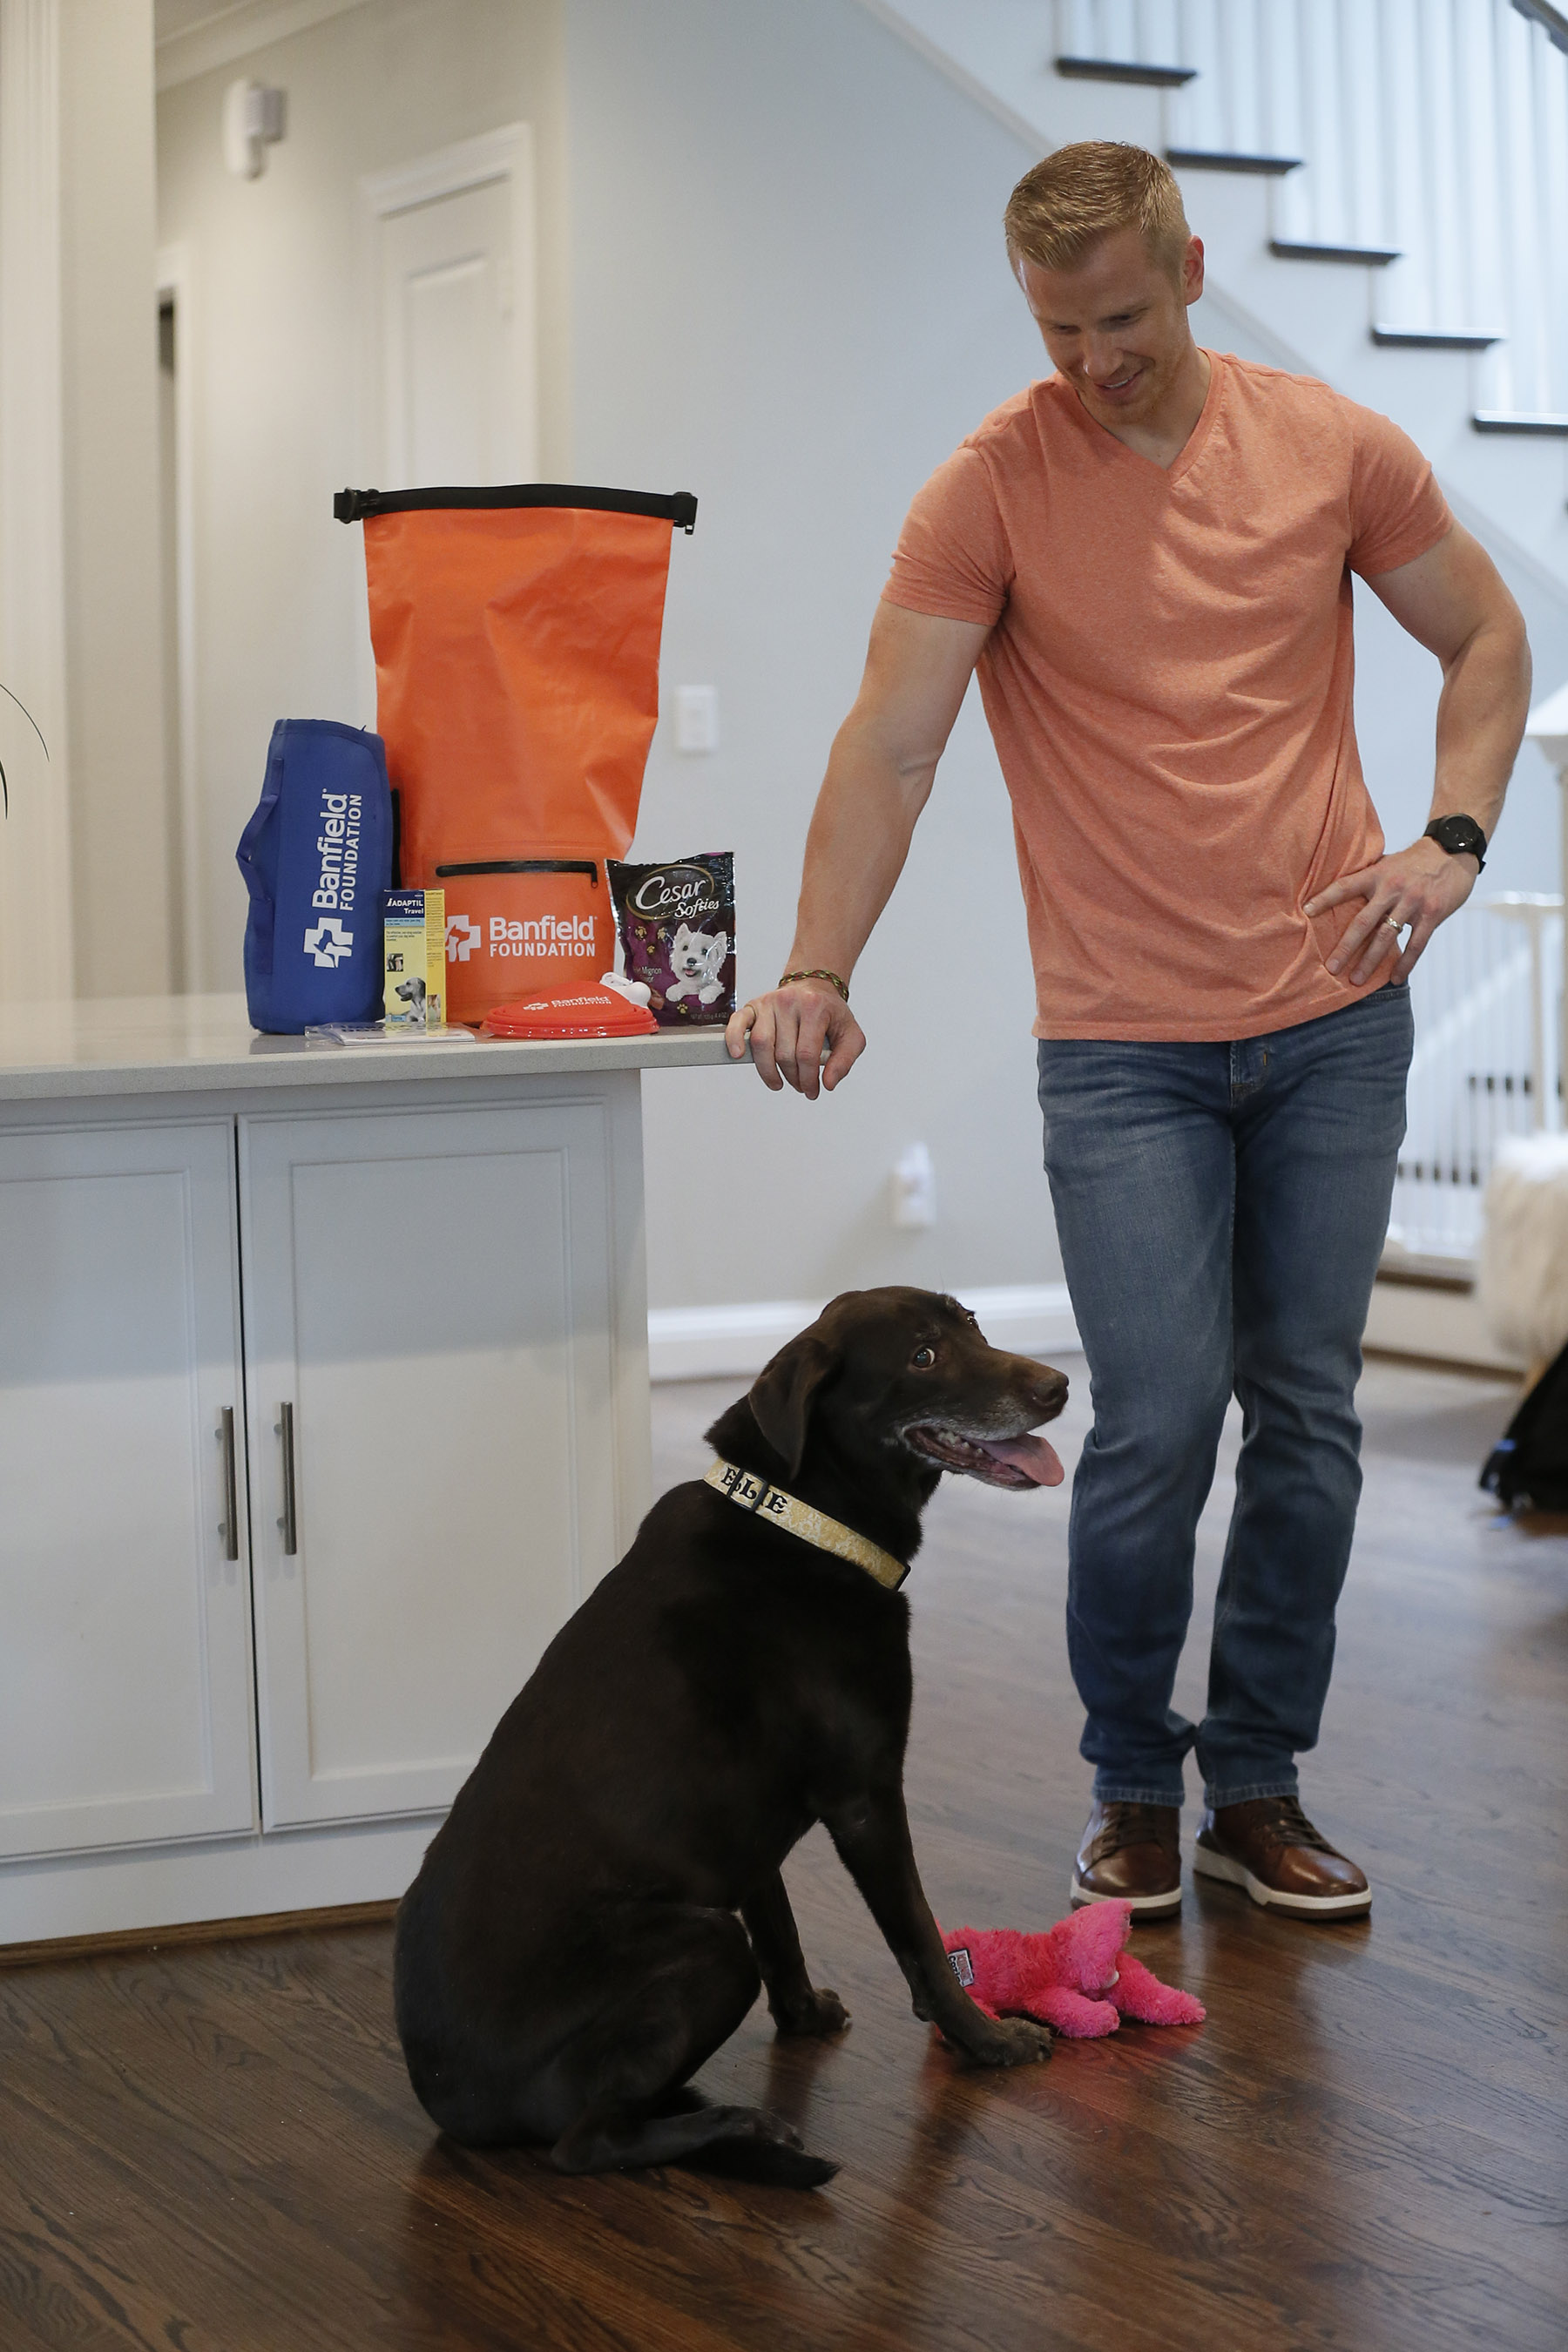 TV personality and Hurricane Harvey responder Sean Lowe shares a moment with his dog, Ellie, while filming a pet disaster preparedness PSA with the Banfield Foundation at his home in Dallas, Texas. The PSA debuted nationally on Wednesday, June 6, 2018 and educates pet owners on the simple yet potentially life-saving steps they can take for their four-legged family members before disaster strikes. (Photo credit: Brandon Wade/AP Images for the Banfield Foundation)